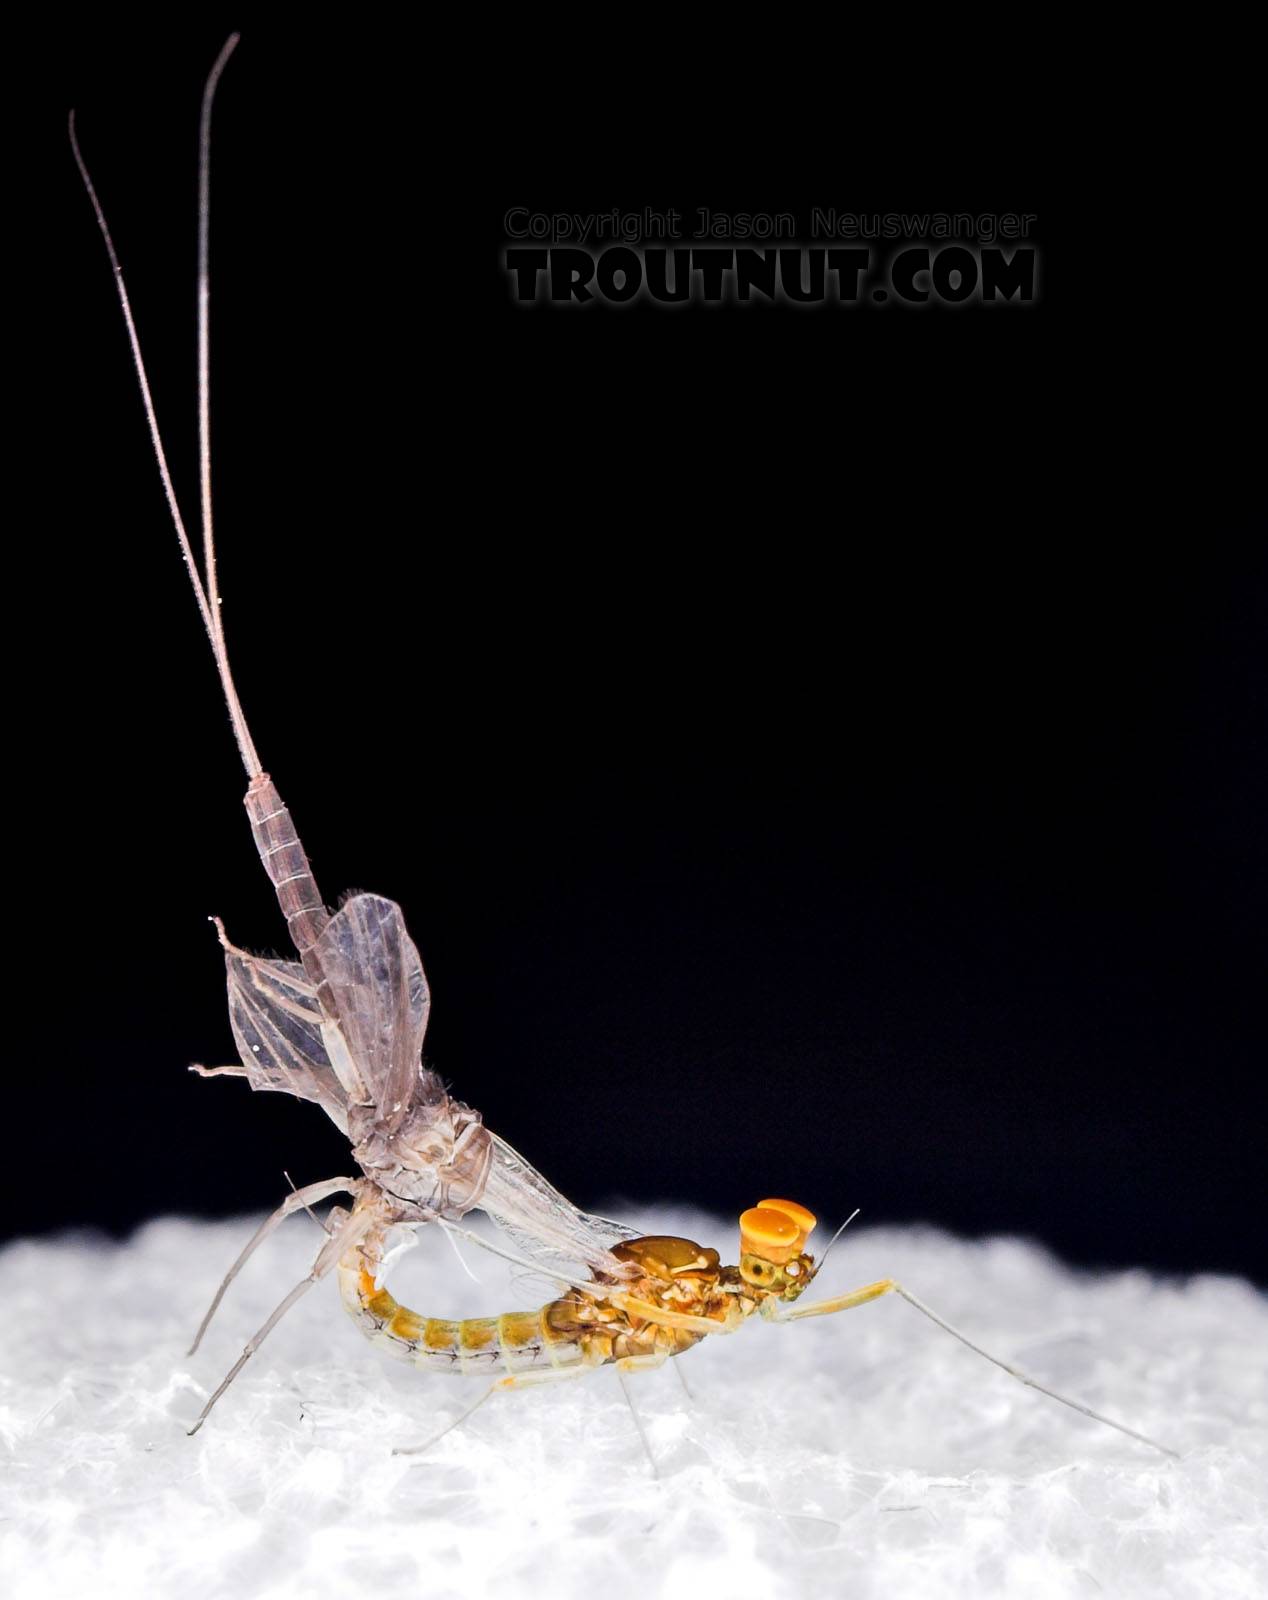 Male Baetis (Blue-Winged Olives) Mayfly Dun from Mystery Creek #43 in New York